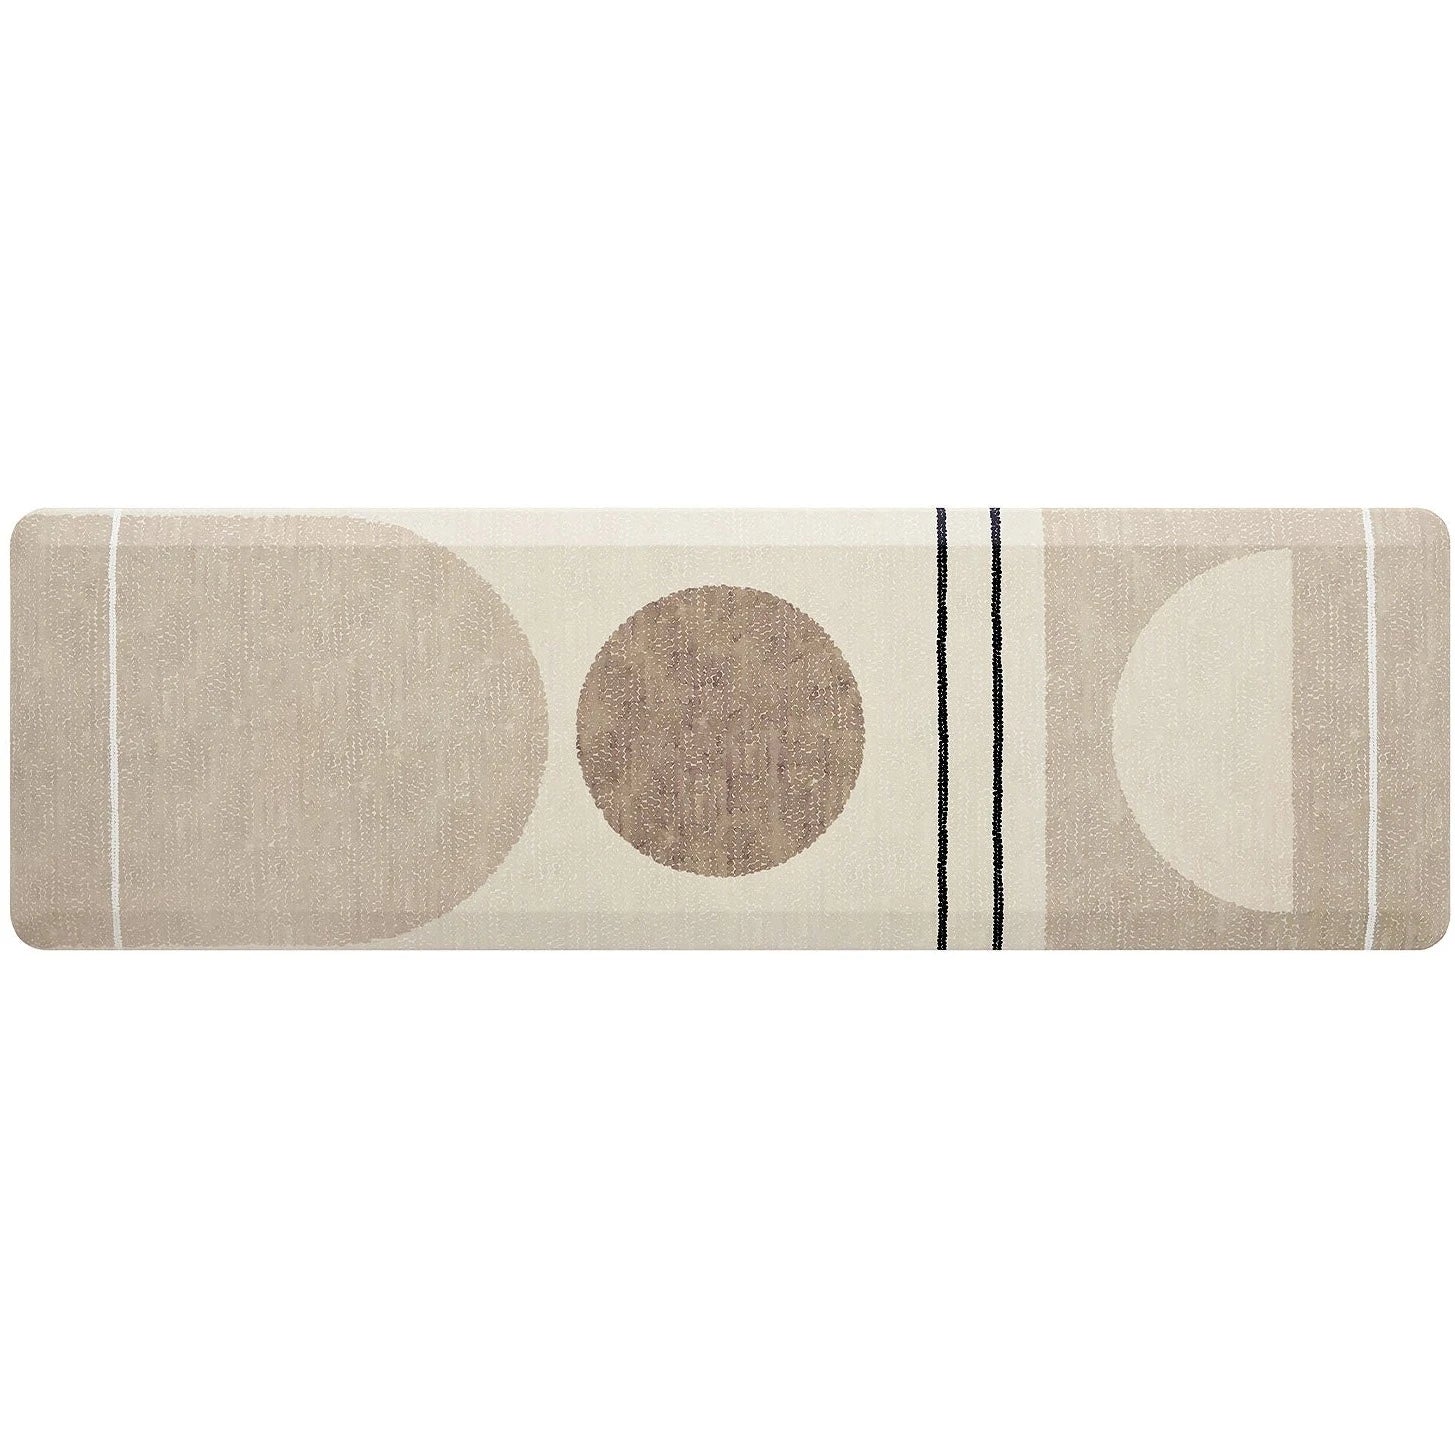 Overhead image of Geode Sesame beige, tan, and brown geometric line print standing mat in size 22x72